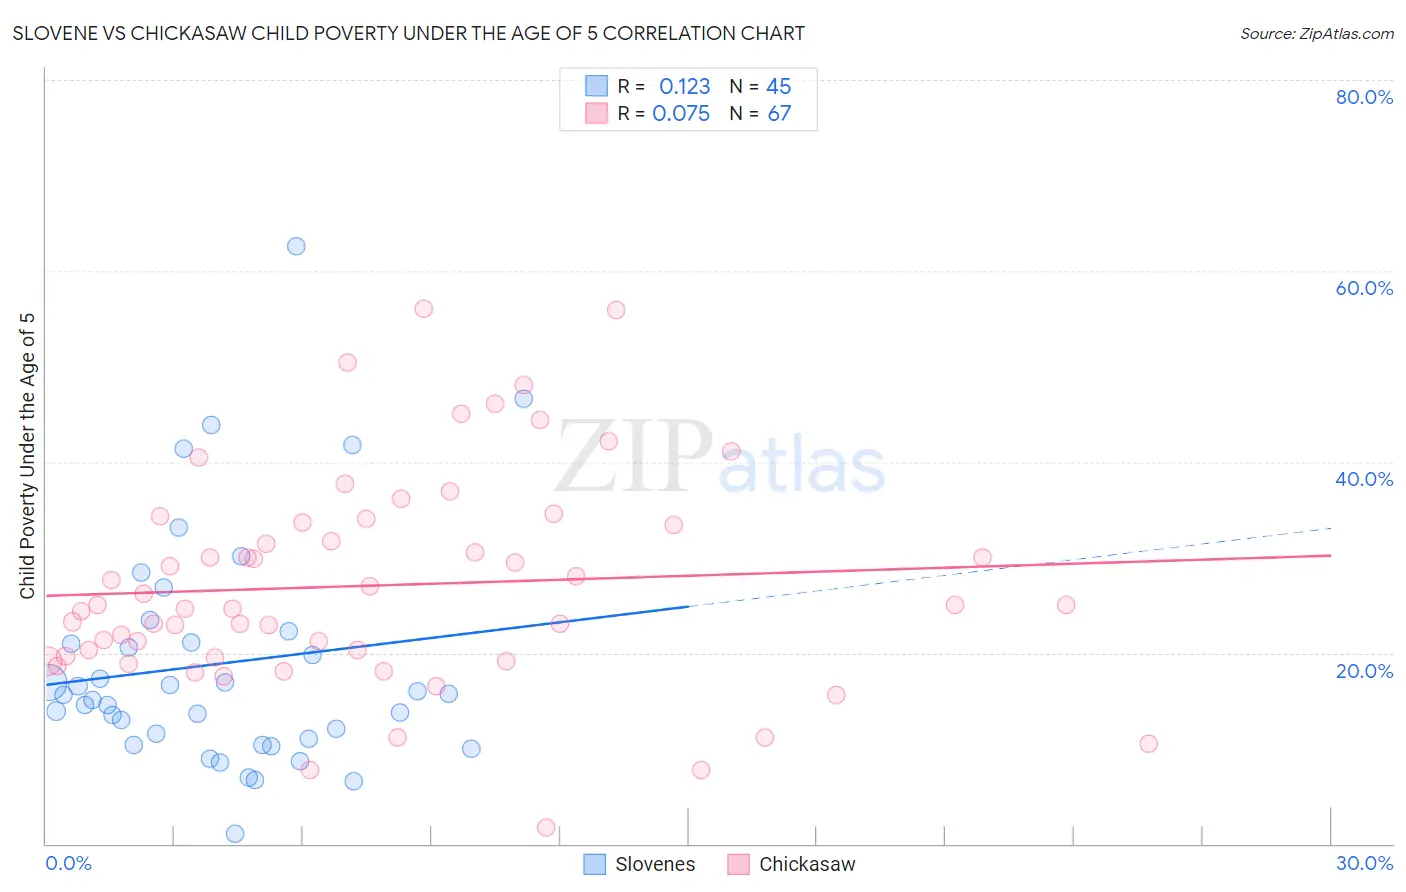 Slovene vs Chickasaw Child Poverty Under the Age of 5